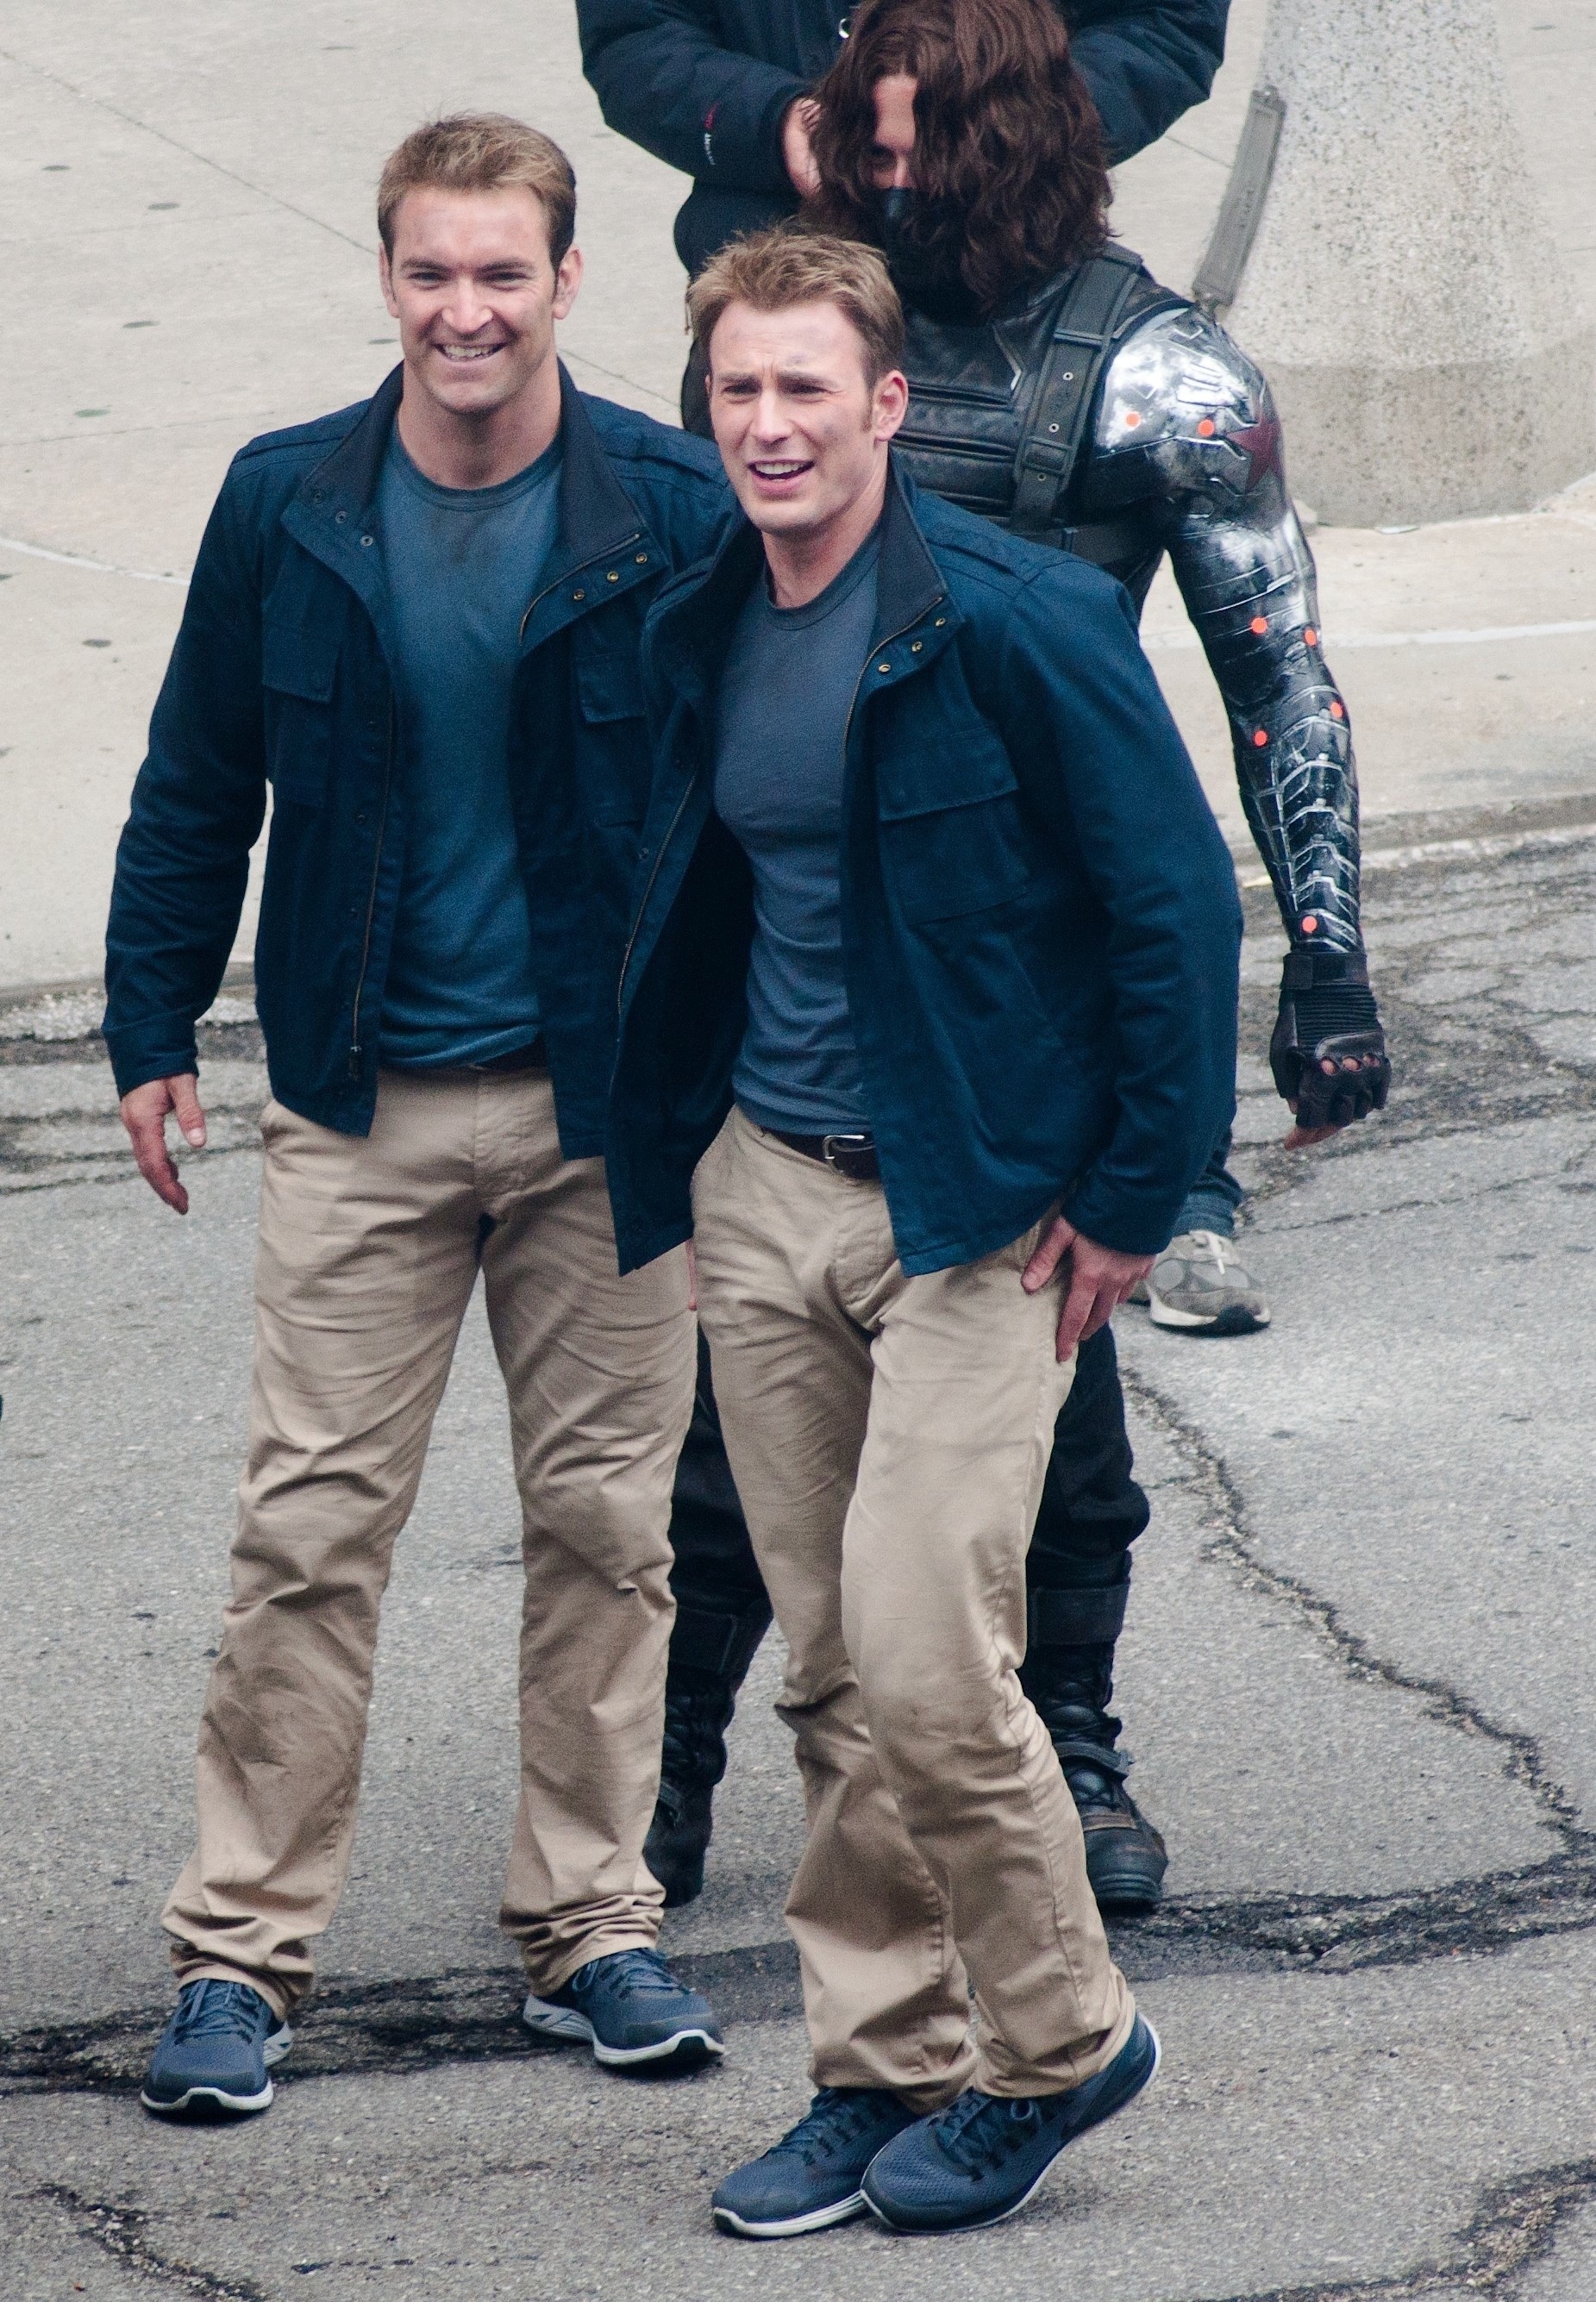 Chris and his body double in matching pants, shirt, jacket, and sneakers